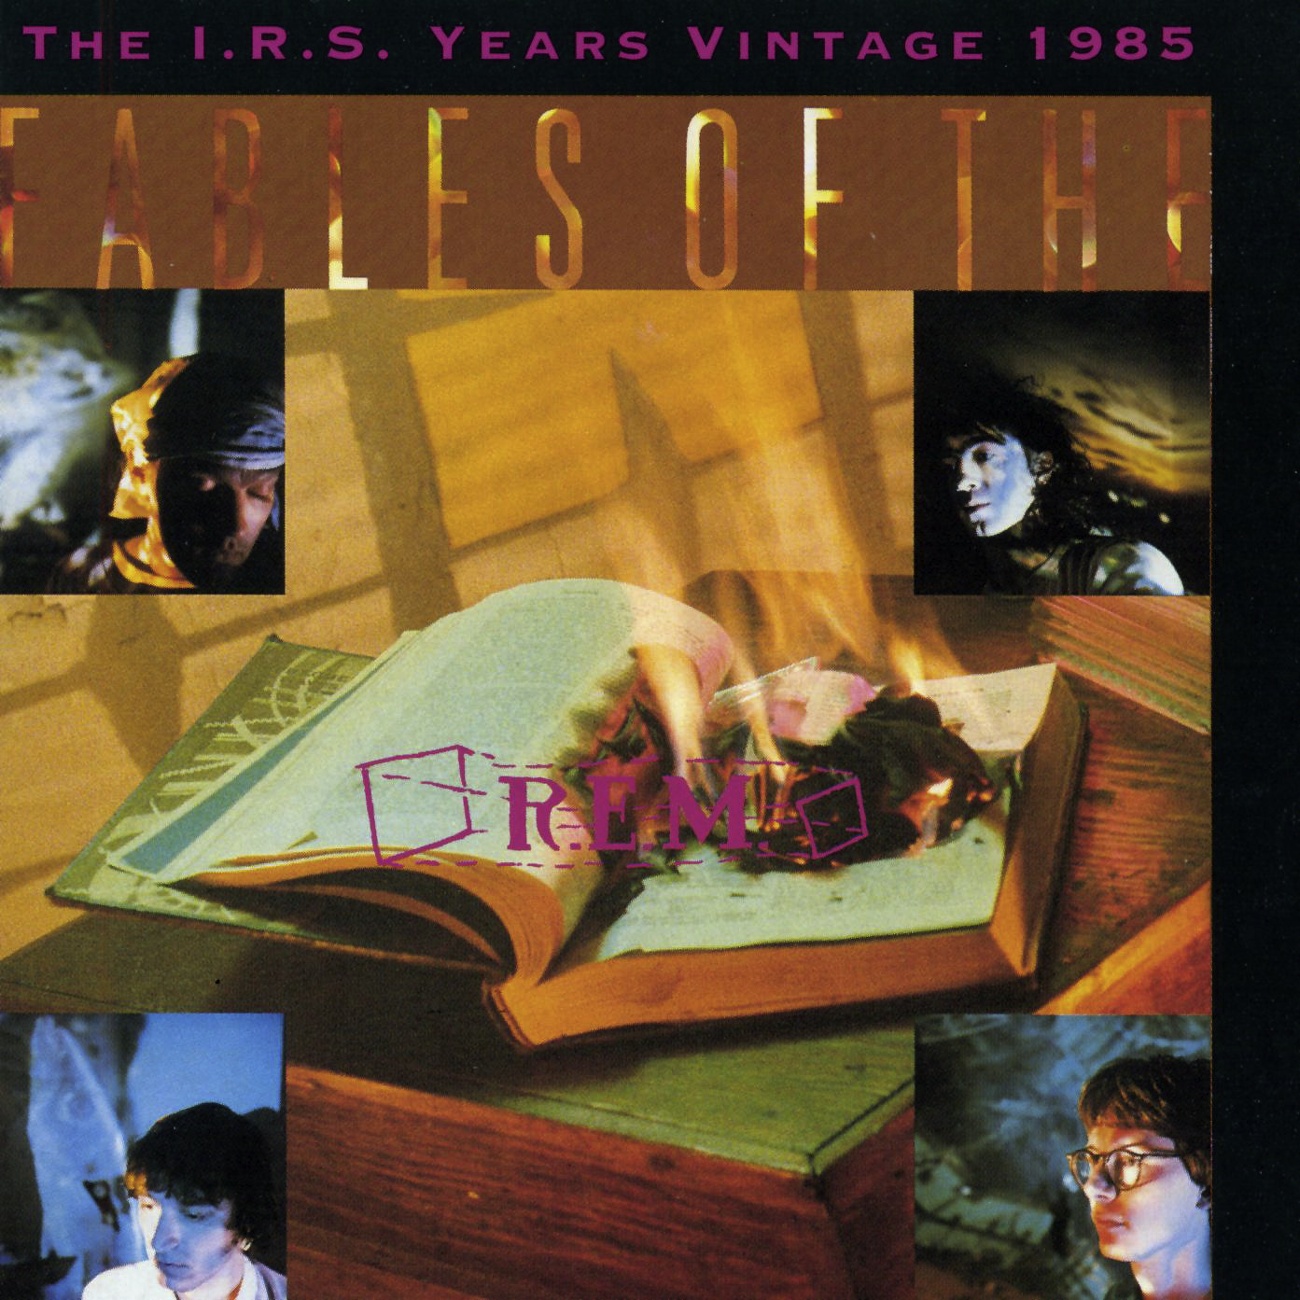 Fables Of The Reconstruction:  The I.R.S. Years Vintage 1985